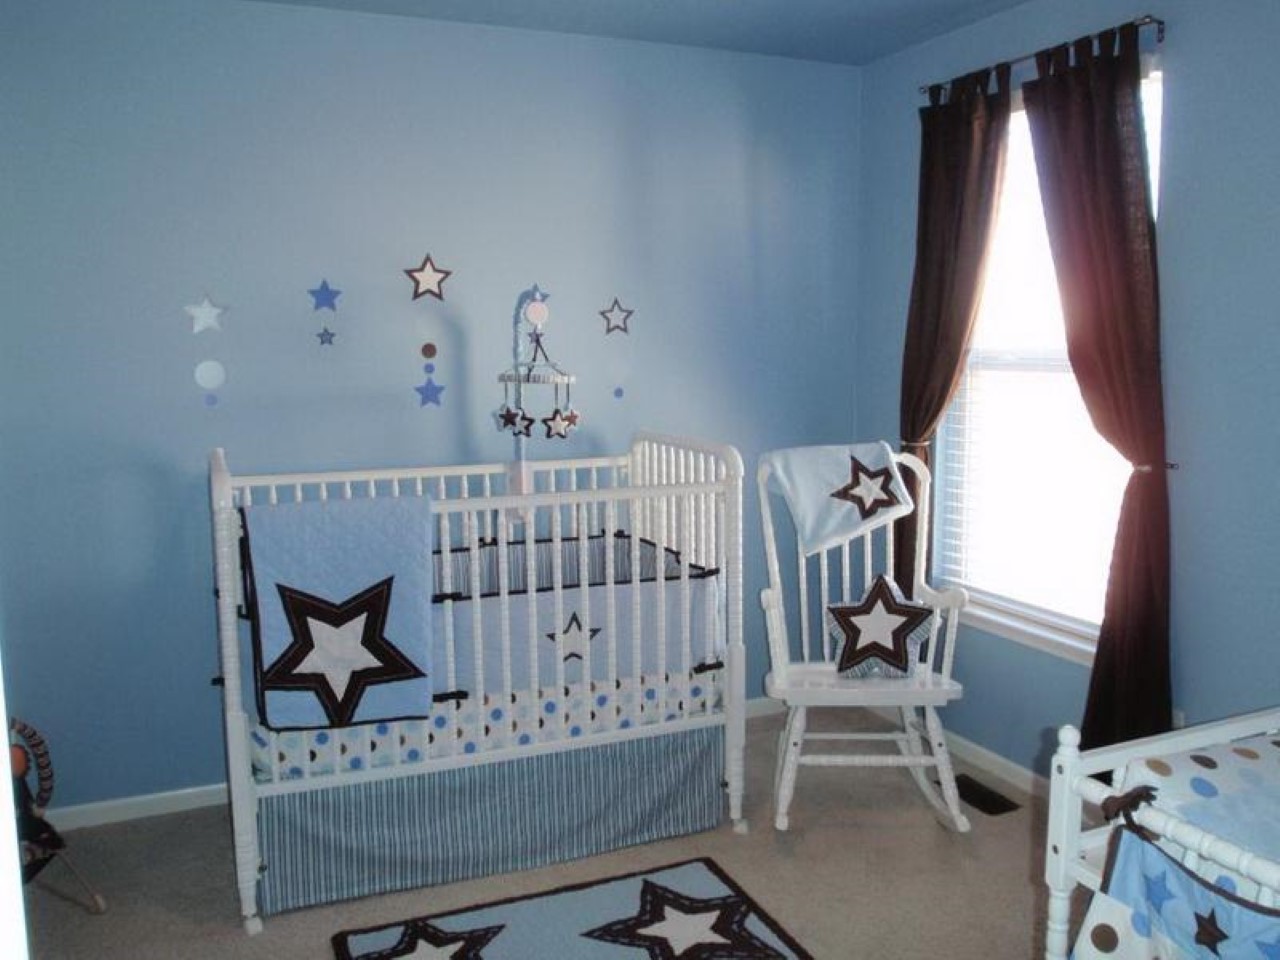 Themed Crib Blue Star Themed Crib Bedding Plus Blue Wall Paint Color In Lovely Baby Boy Nursery Idea Feat Comfortable White Rocking Chair Kids Room Awesome Baby Boy Nursery Room Ideas